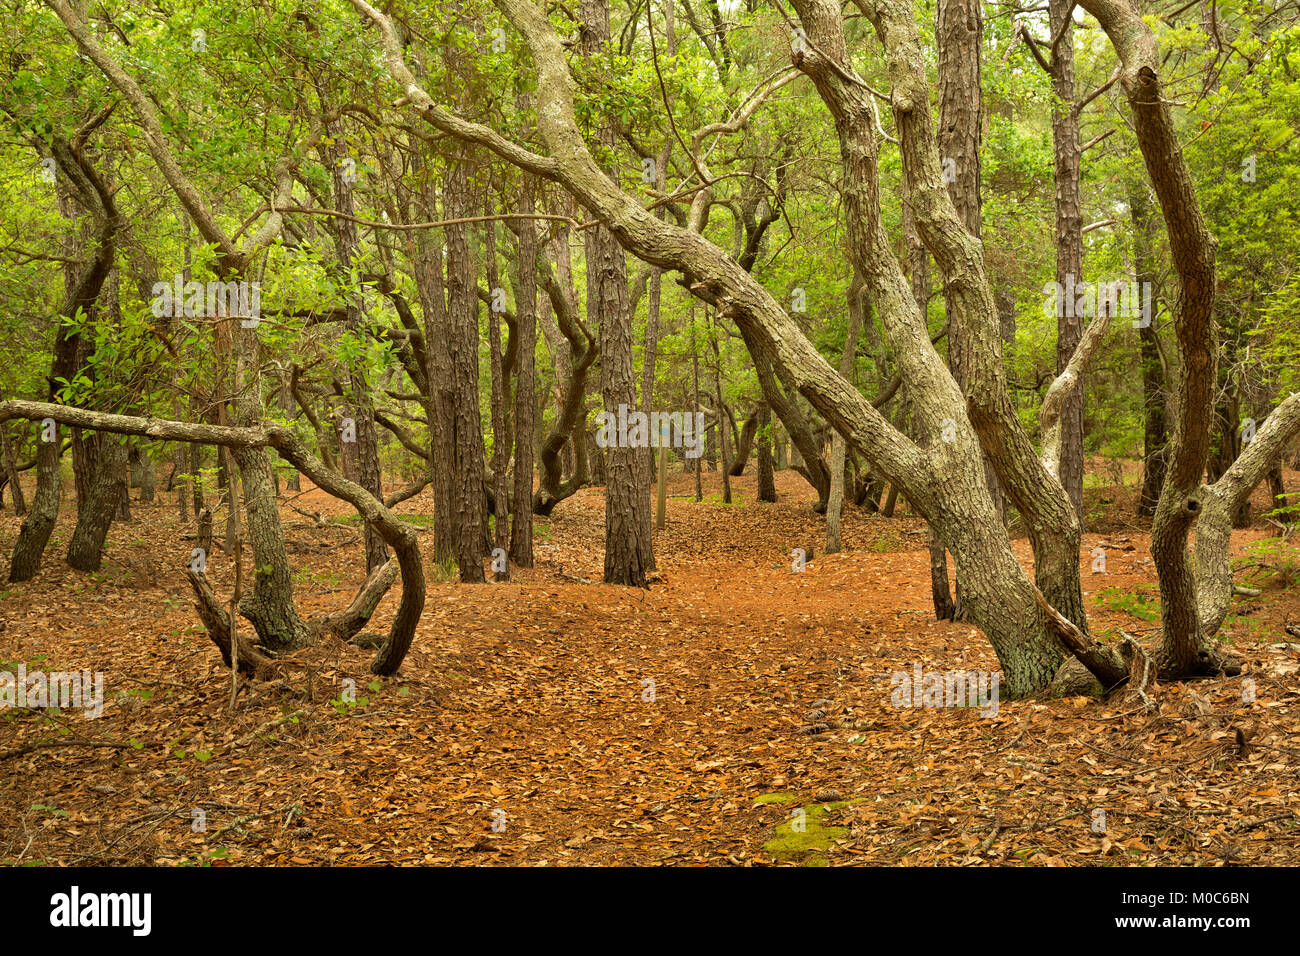 NC01377-00...NORTH CAROLINA - Live oak trees along the trail through an oak and loblolly pine forest at the Currituck Banks Reserve on the Outer Banks Stock Photo